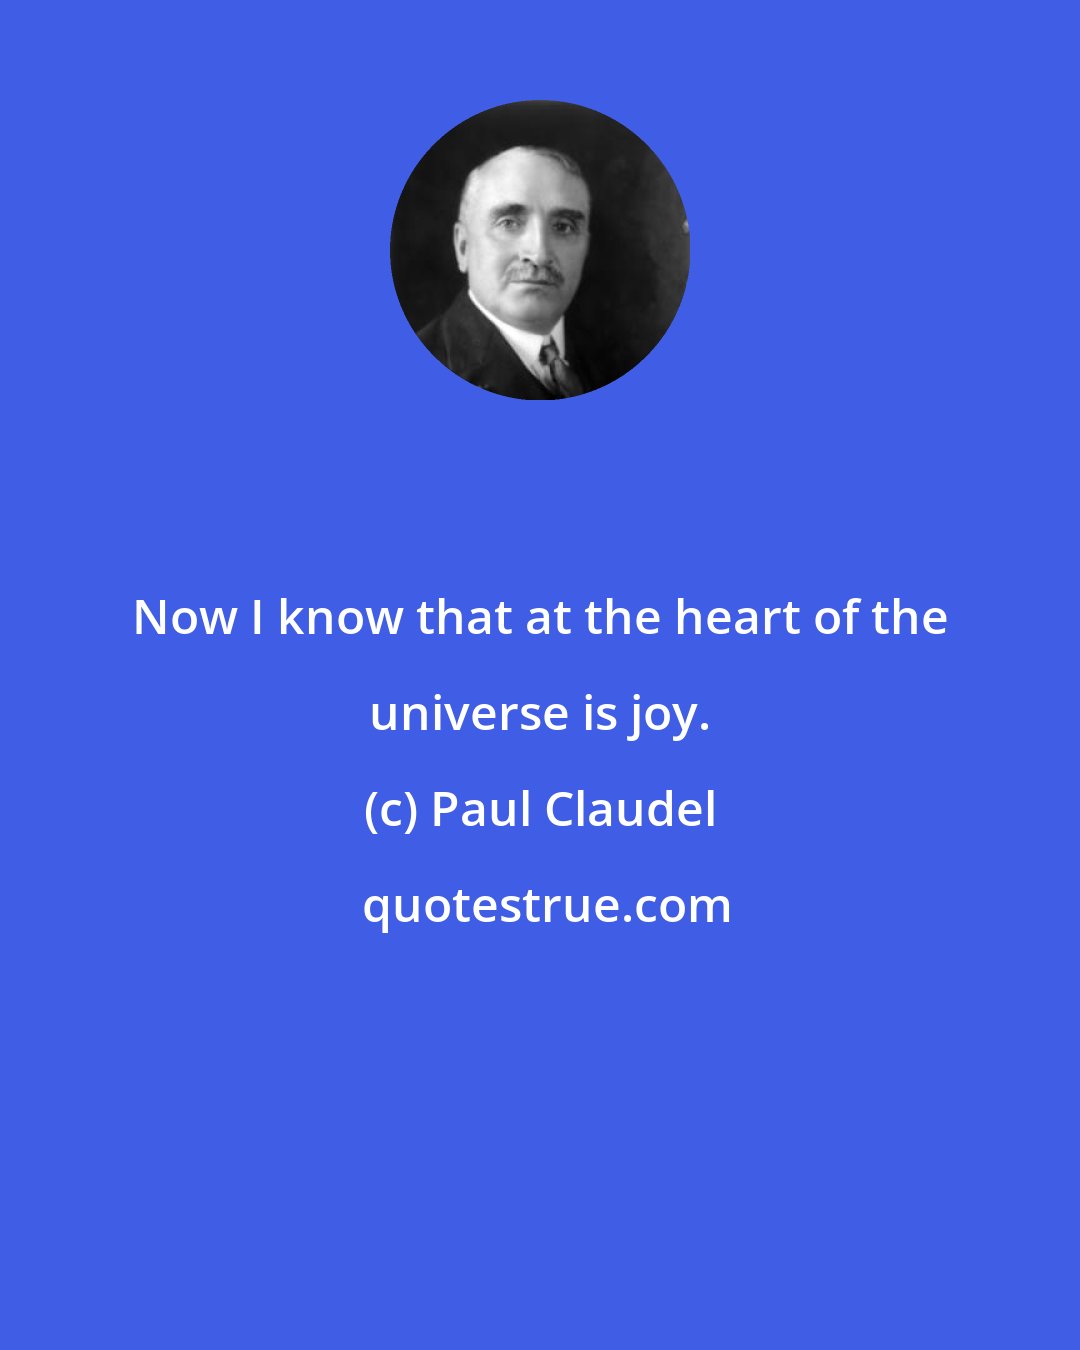 Paul Claudel: Now I know that at the heart of the universe is joy.